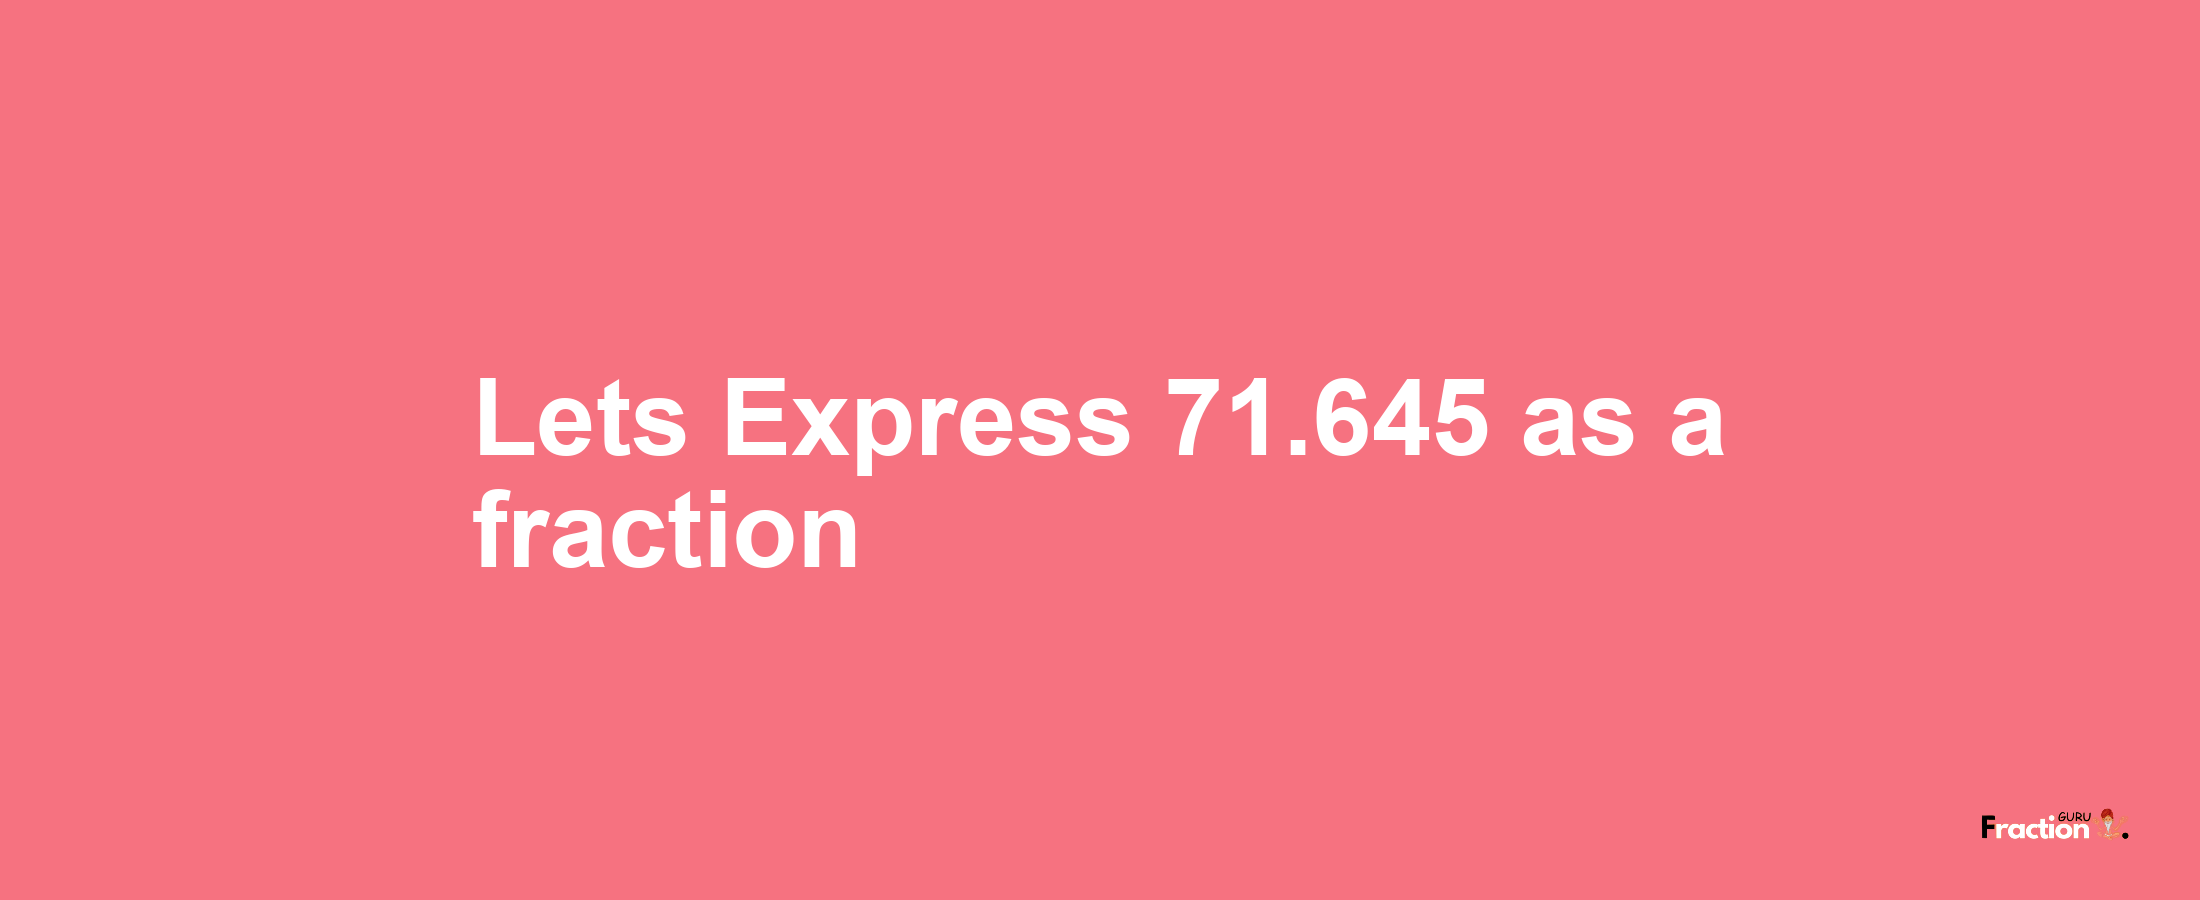 Lets Express 71.645 as afraction